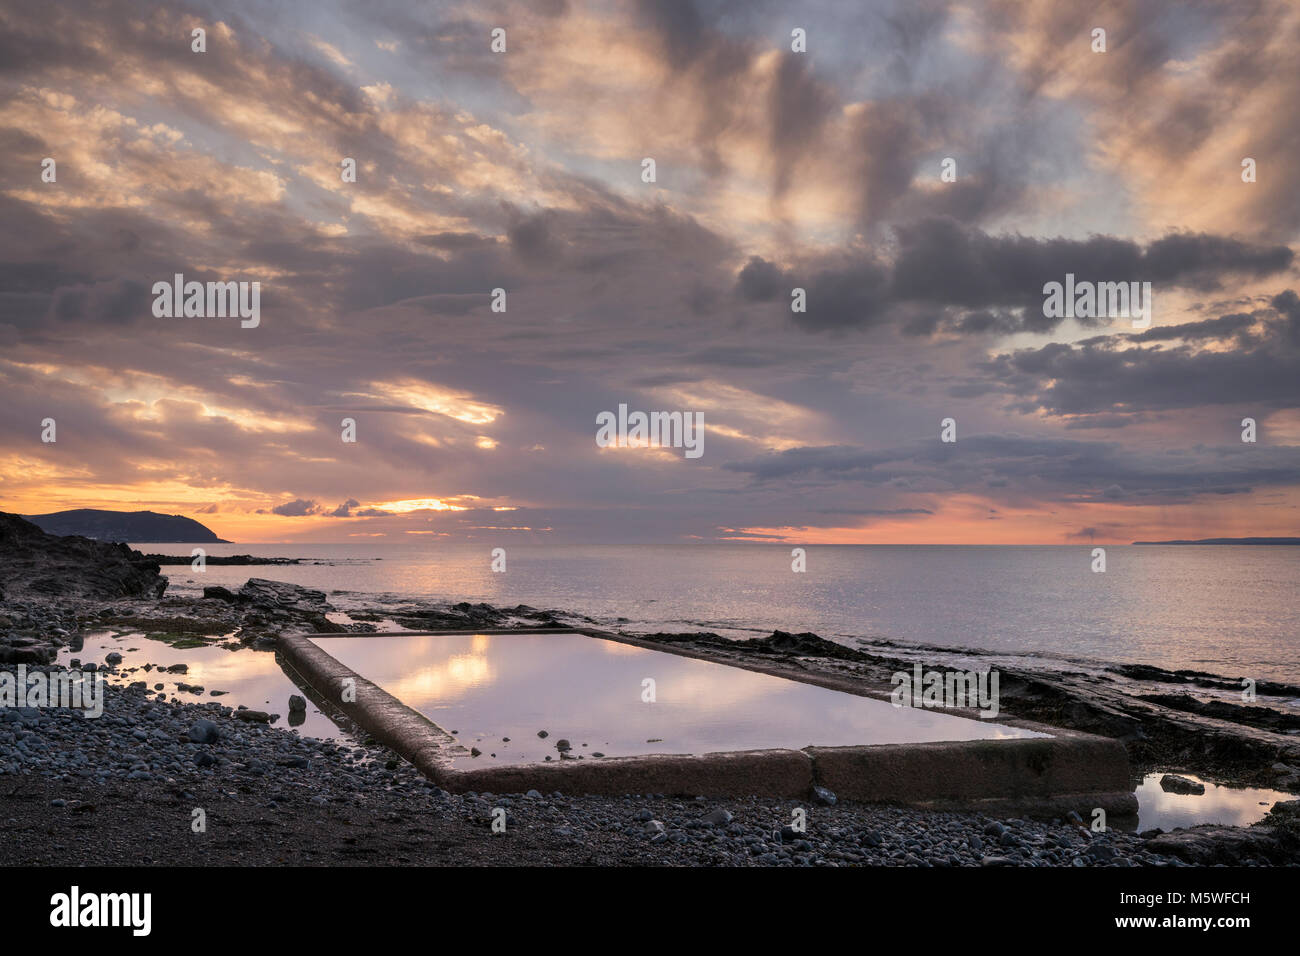 The seawater tidal pool at Watchet in Somerset, England on a summer evening at sunset looking east towards Minehead. Stock Photo